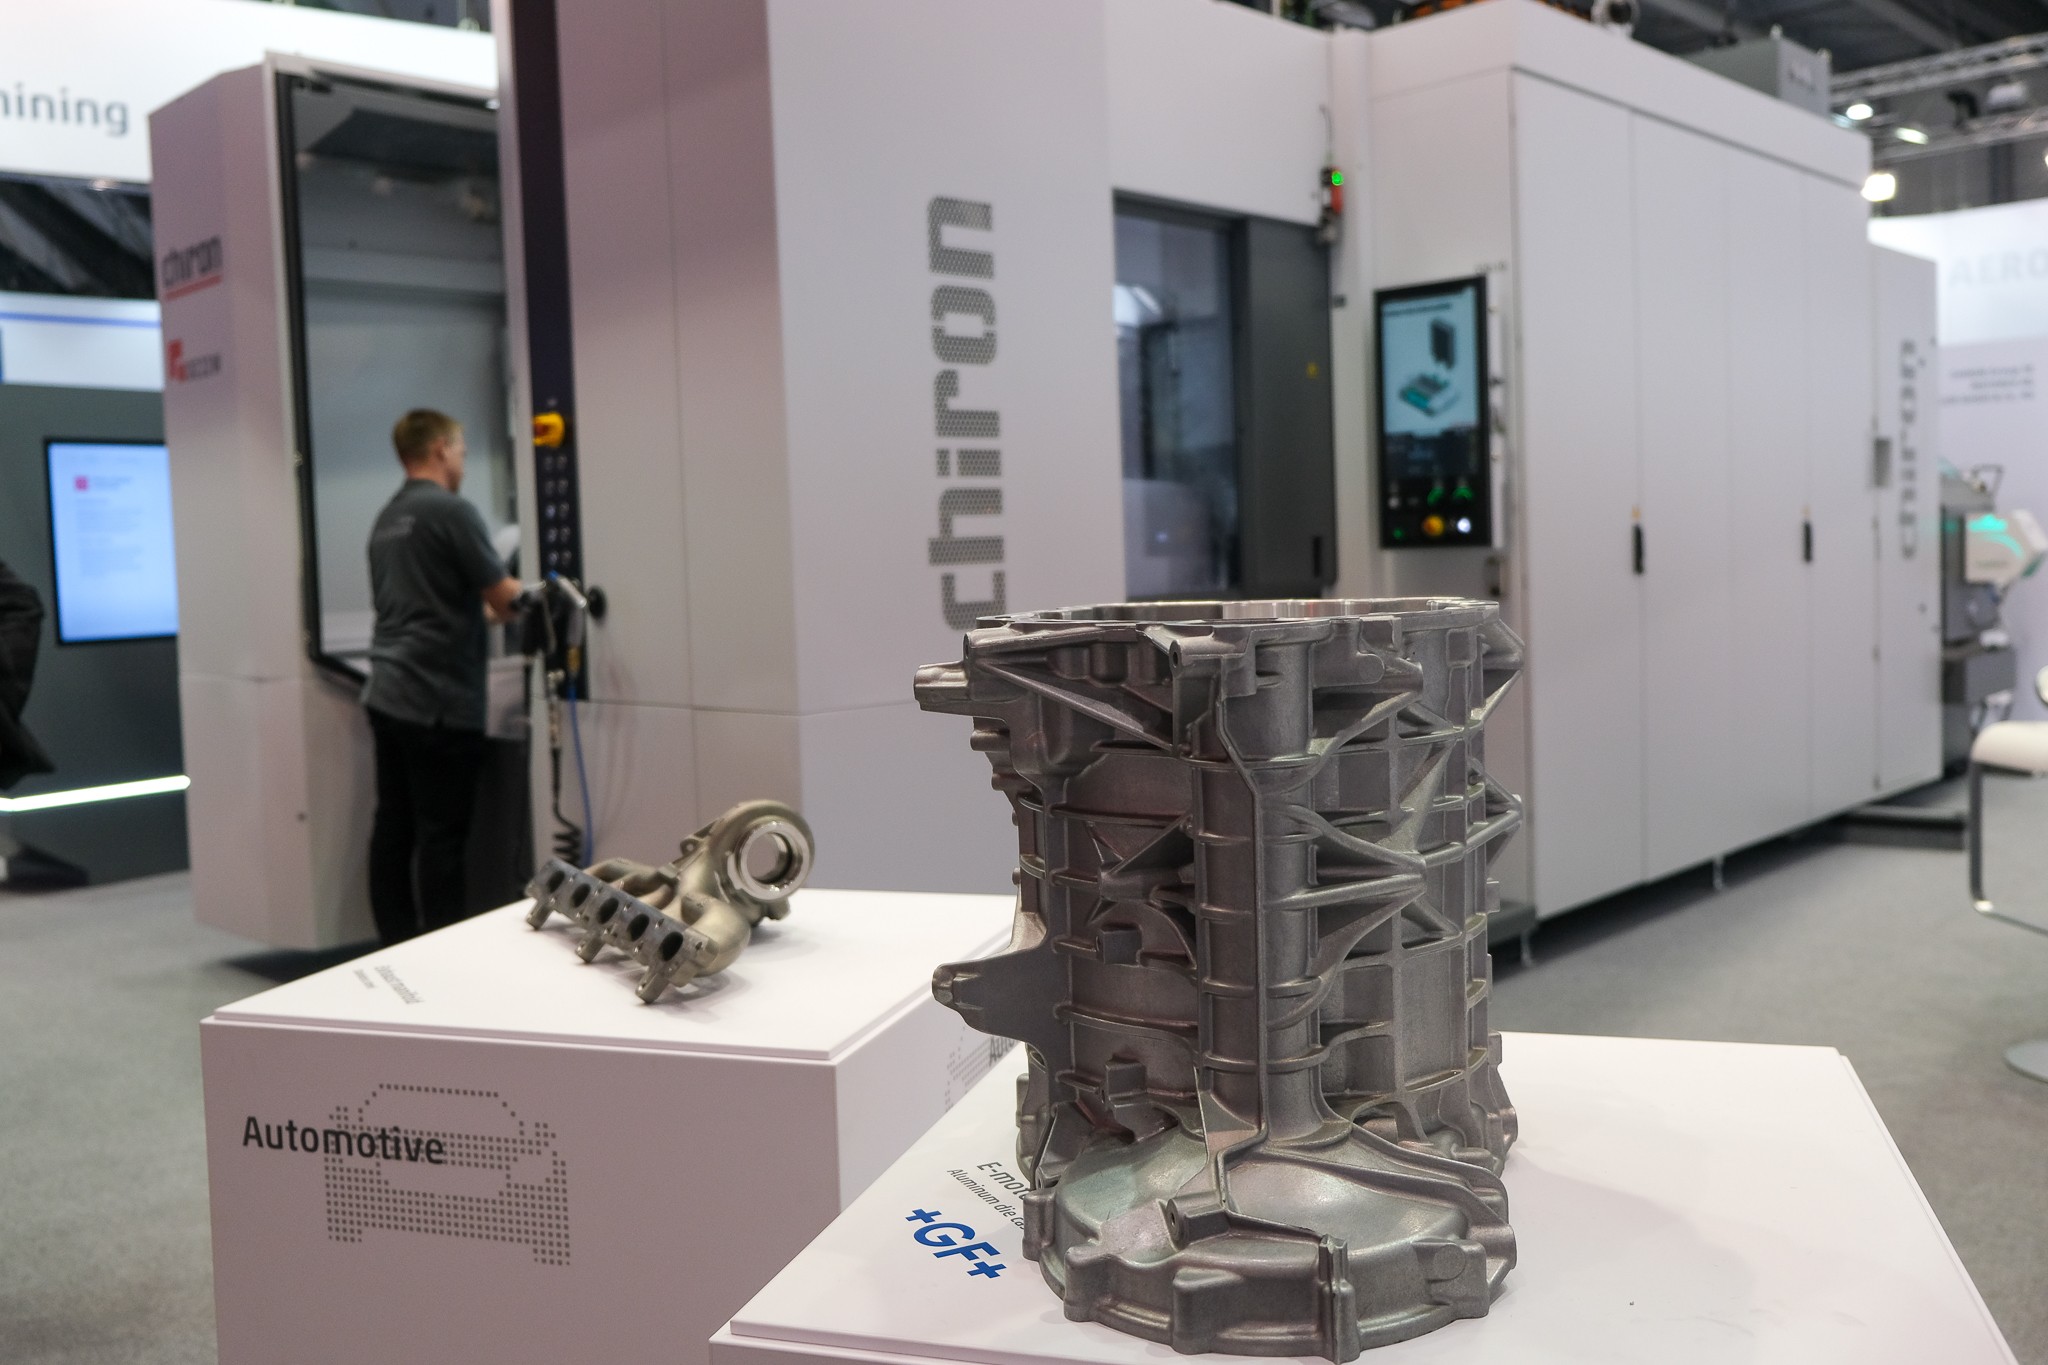 The DZ 22 W five axis for double-spindle machining of large components in short cycle times and workpiece changer for loading and unloading during regular machine operation.